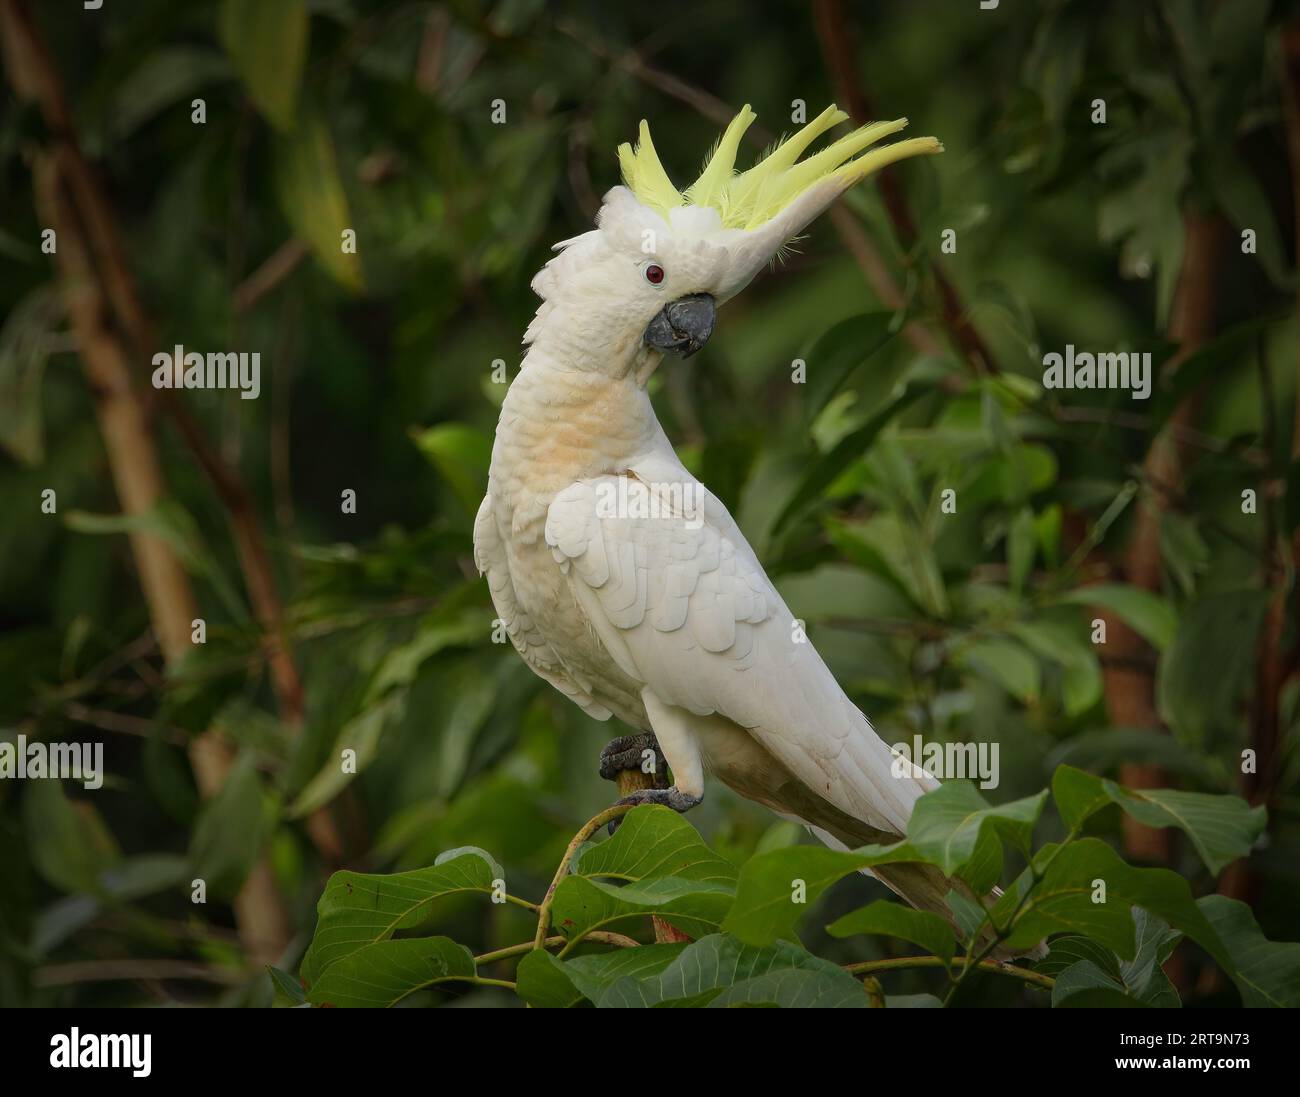 A Sulphur-Crested Cockatoo is showing off its crest. Northern Territory, Australia. Stock Photo